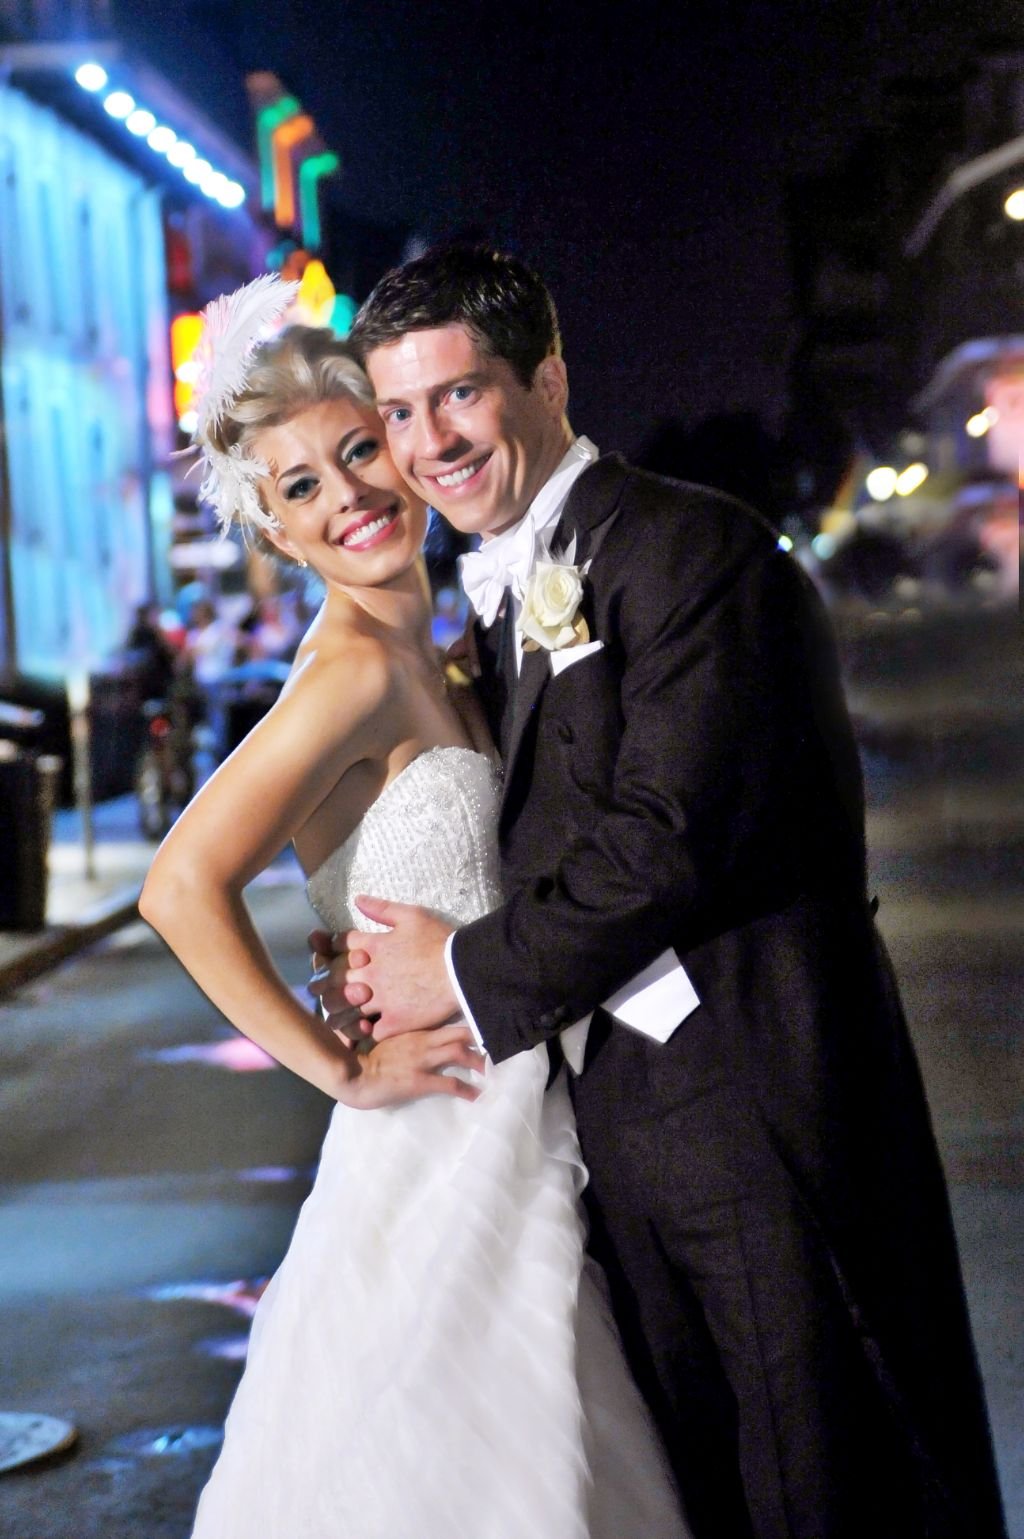 Stunning Christian couple hug in a street after marrying